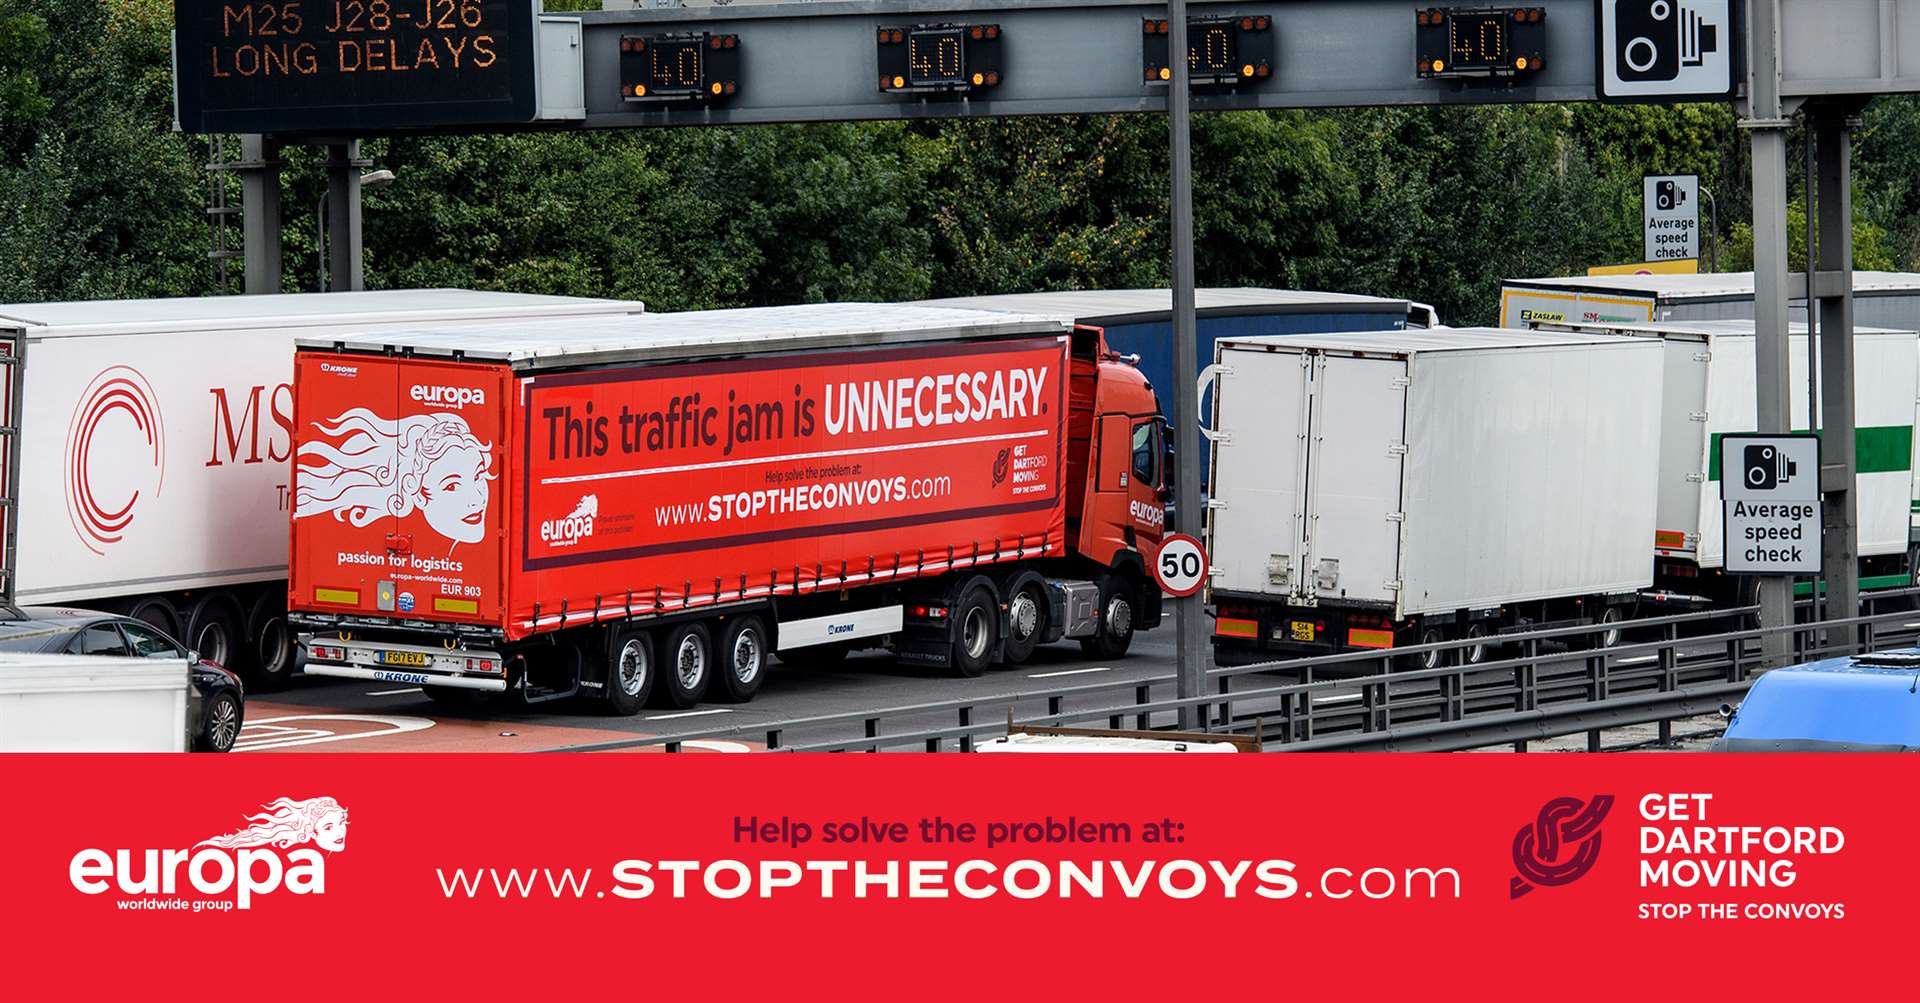 Europa has launched its Stop the Convoys campaign in a bid to reduce congestion at Dartford Crossing